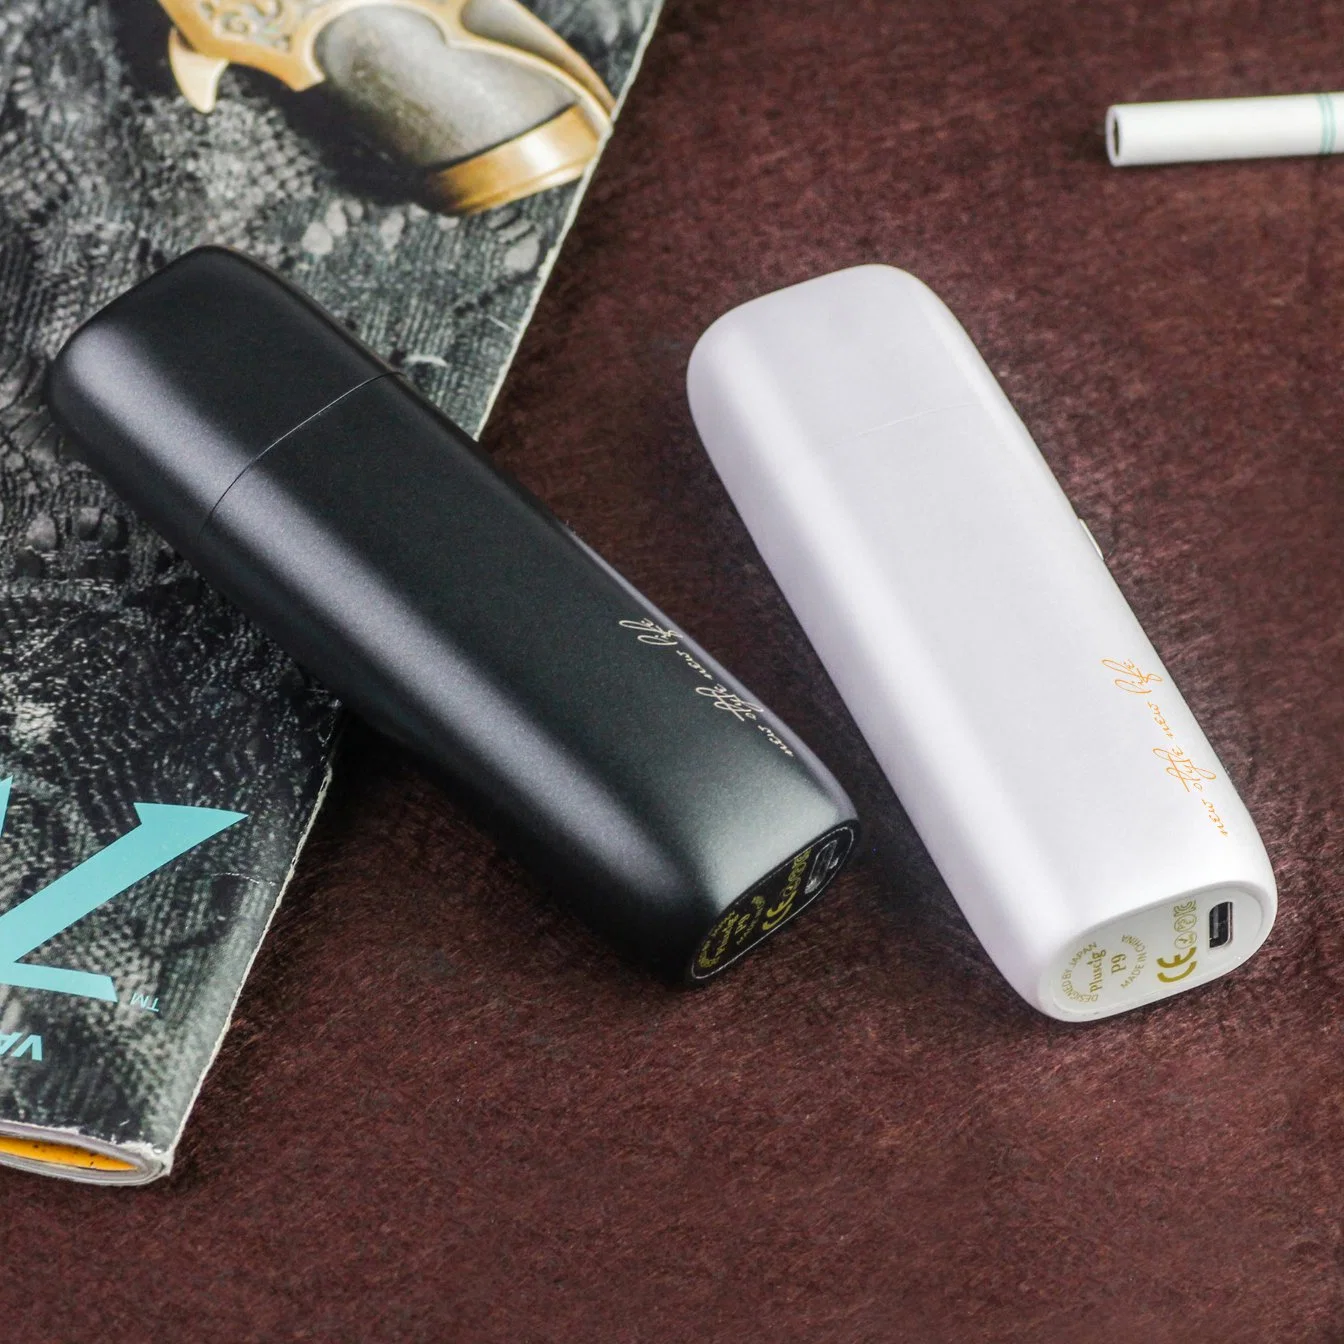 China Wholesale/Supplier Japan Hot Selling Heating Not Burning Electrical Cigarette Device Temperature Adjustable 3500mAh Compatible with Iqos Pluscig P9 vape